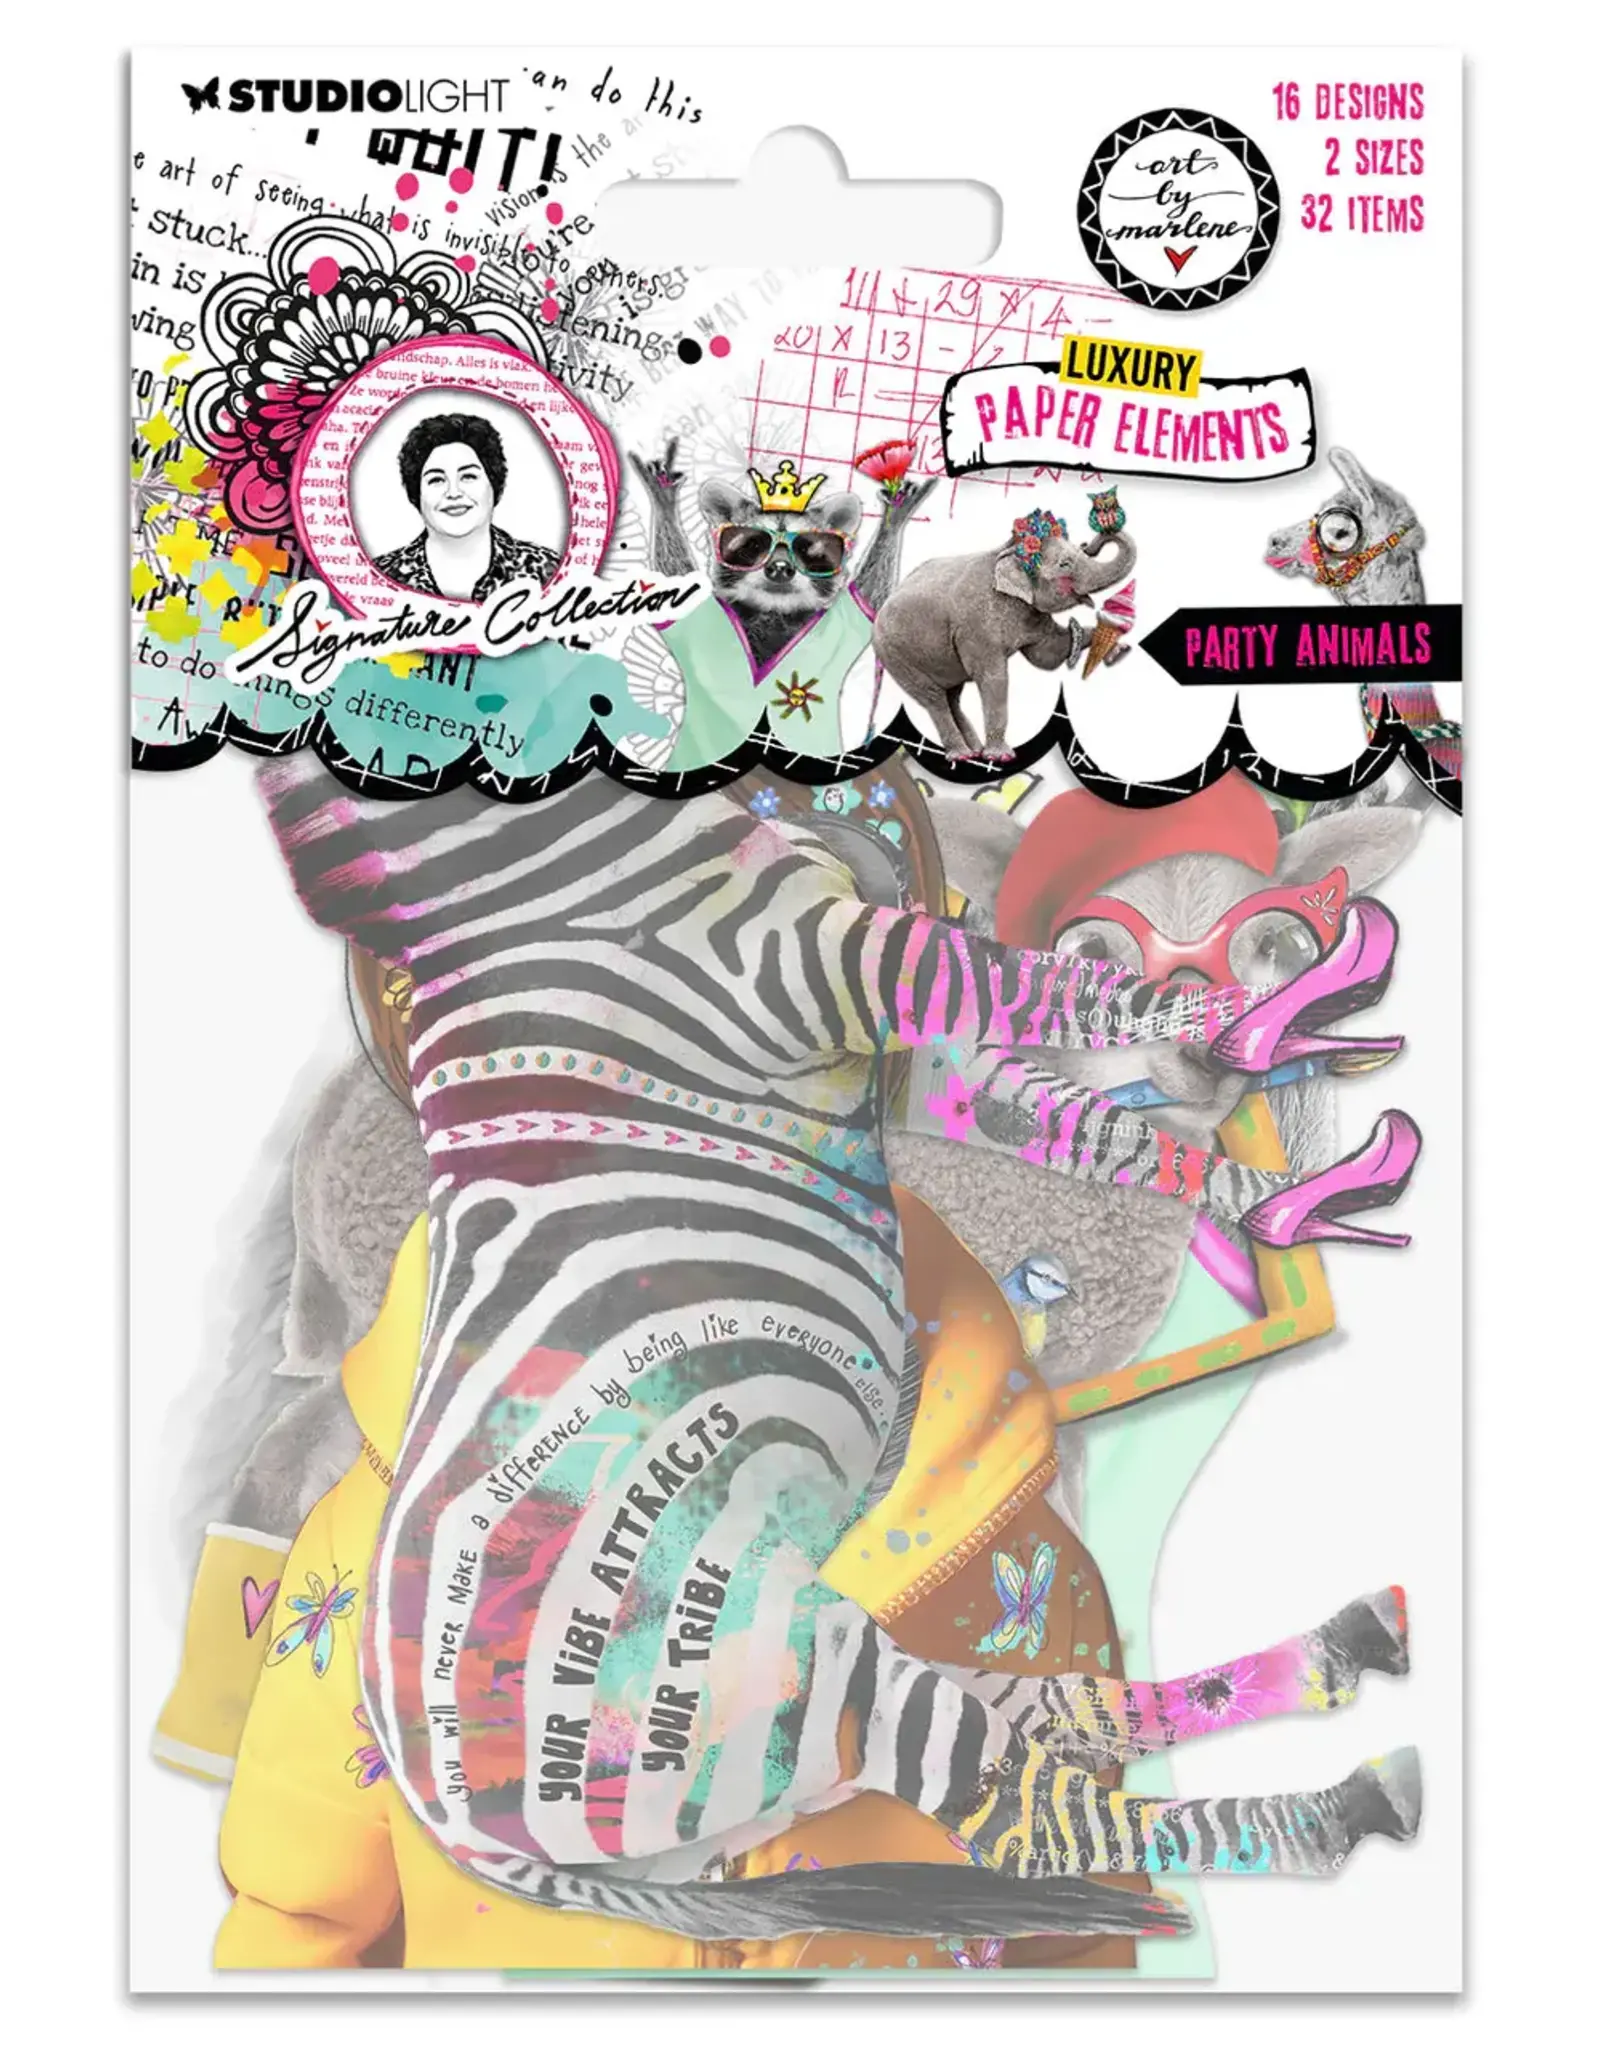 STUDIOLIGHT STUDIOLIGHT ART BY MARLENE SIGNATURE COLLECTION PARTY ANIMALS PAPER ELEMENTS